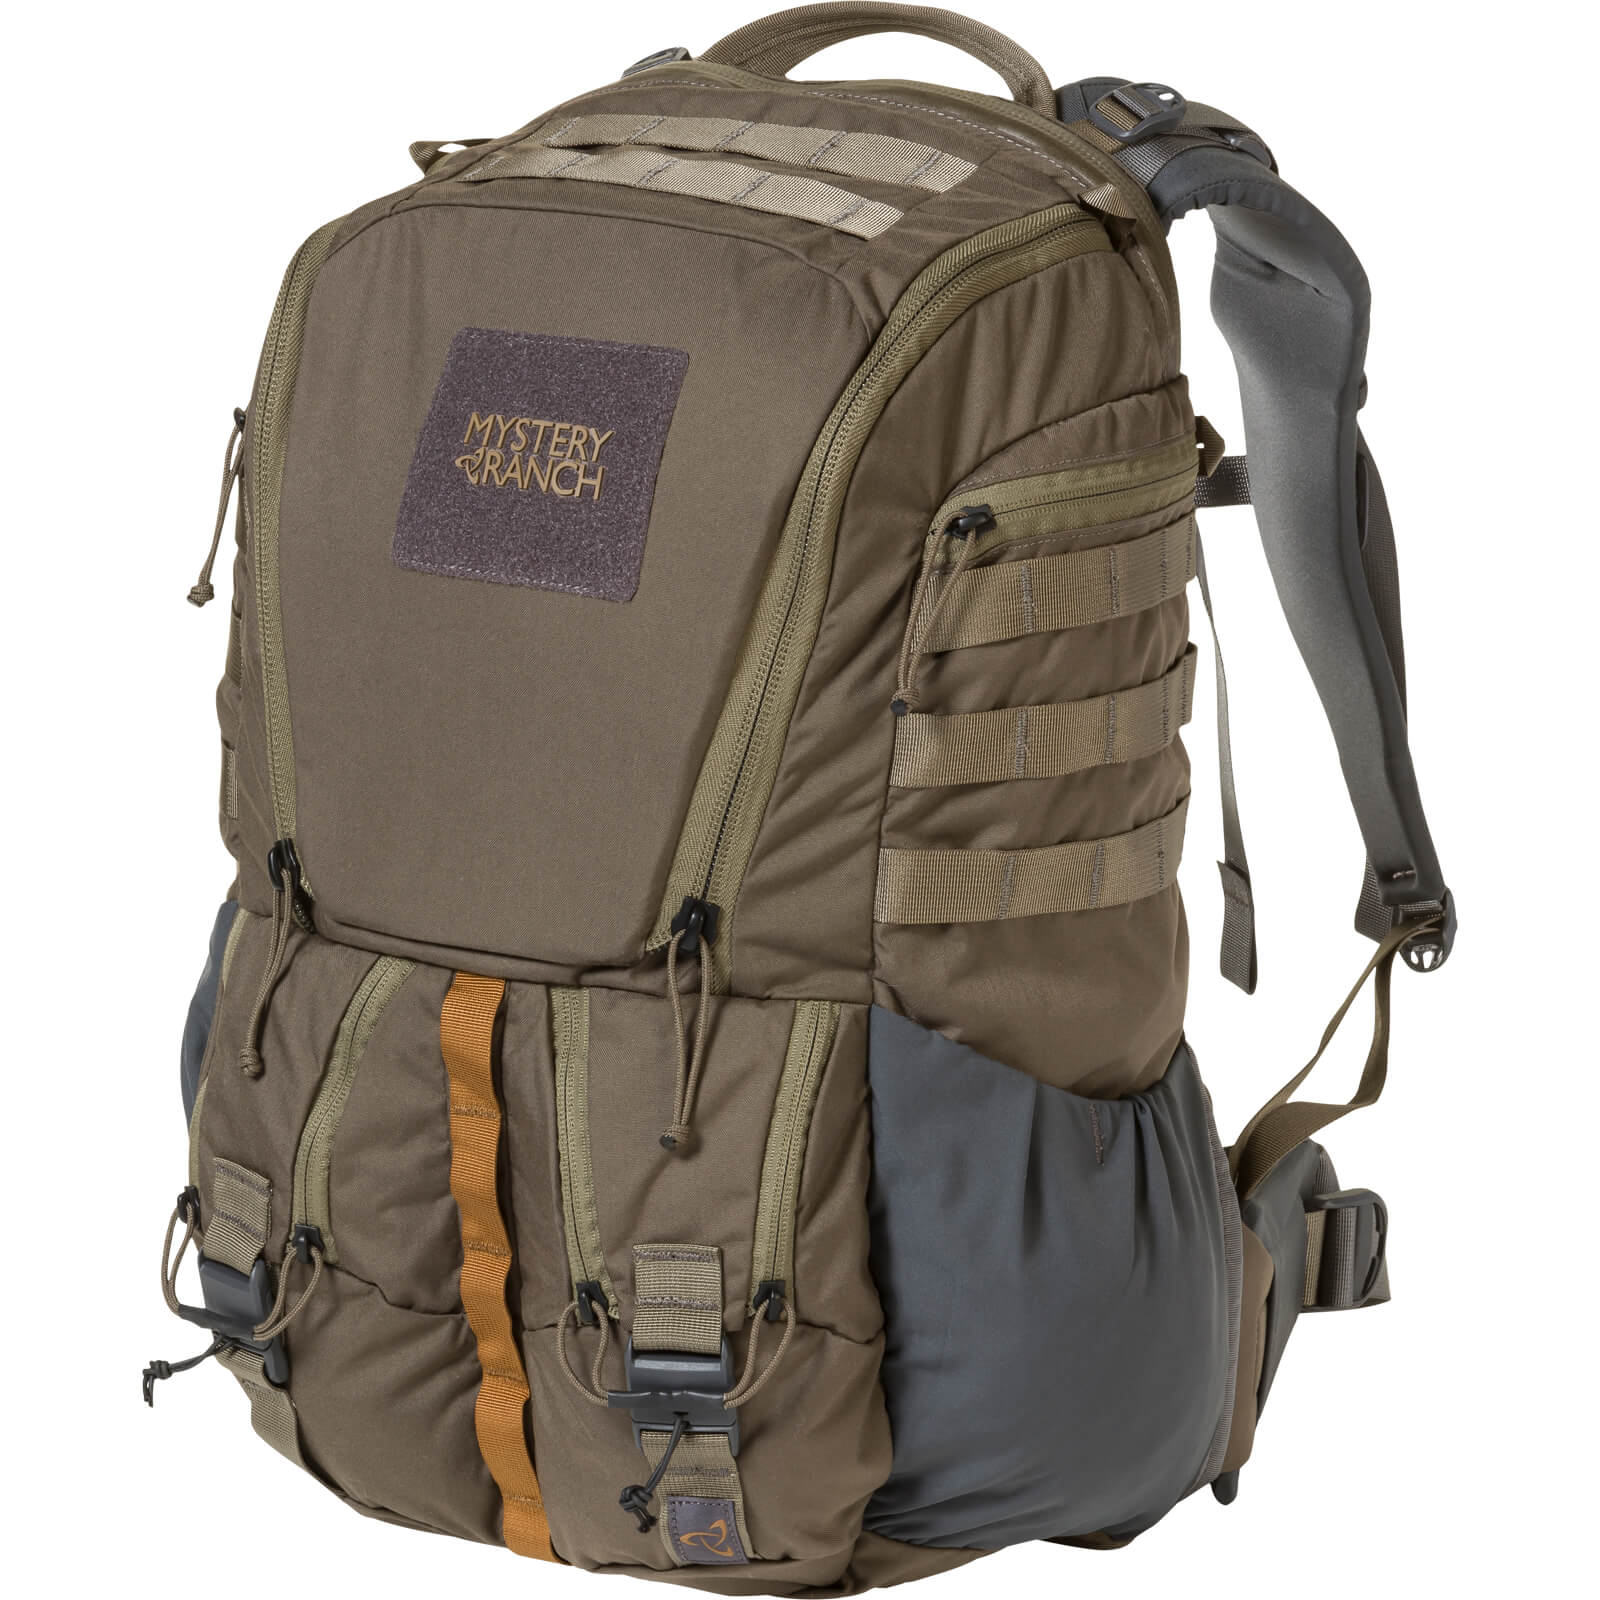 Military Inspired Tactical Pack MYSTERY RANCH Rip Ruck 32 Liter Backpack 